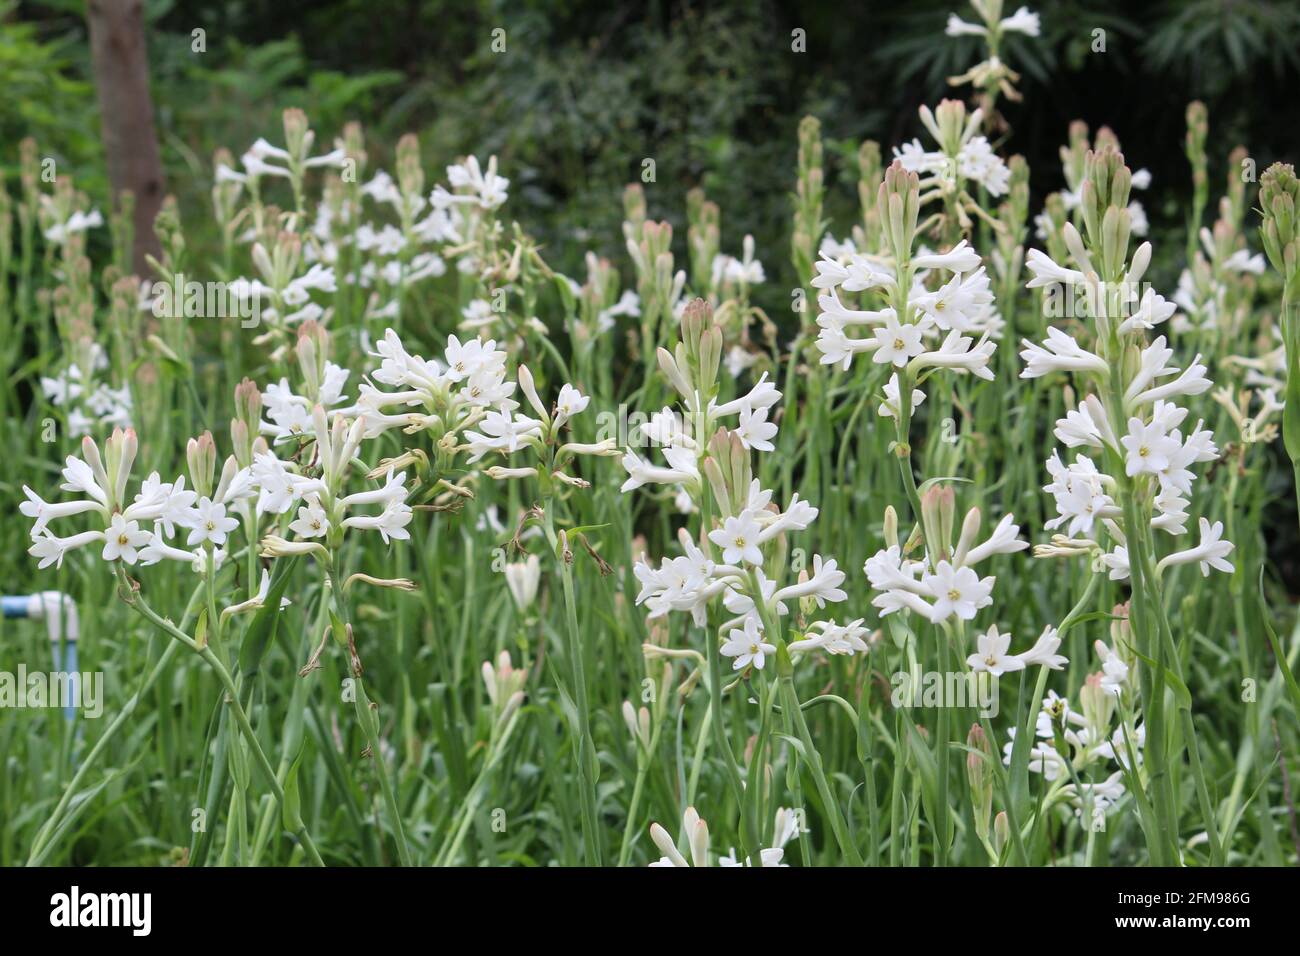 Selective focus shot of white flowers of tuberose plant in a garden Stock Photo